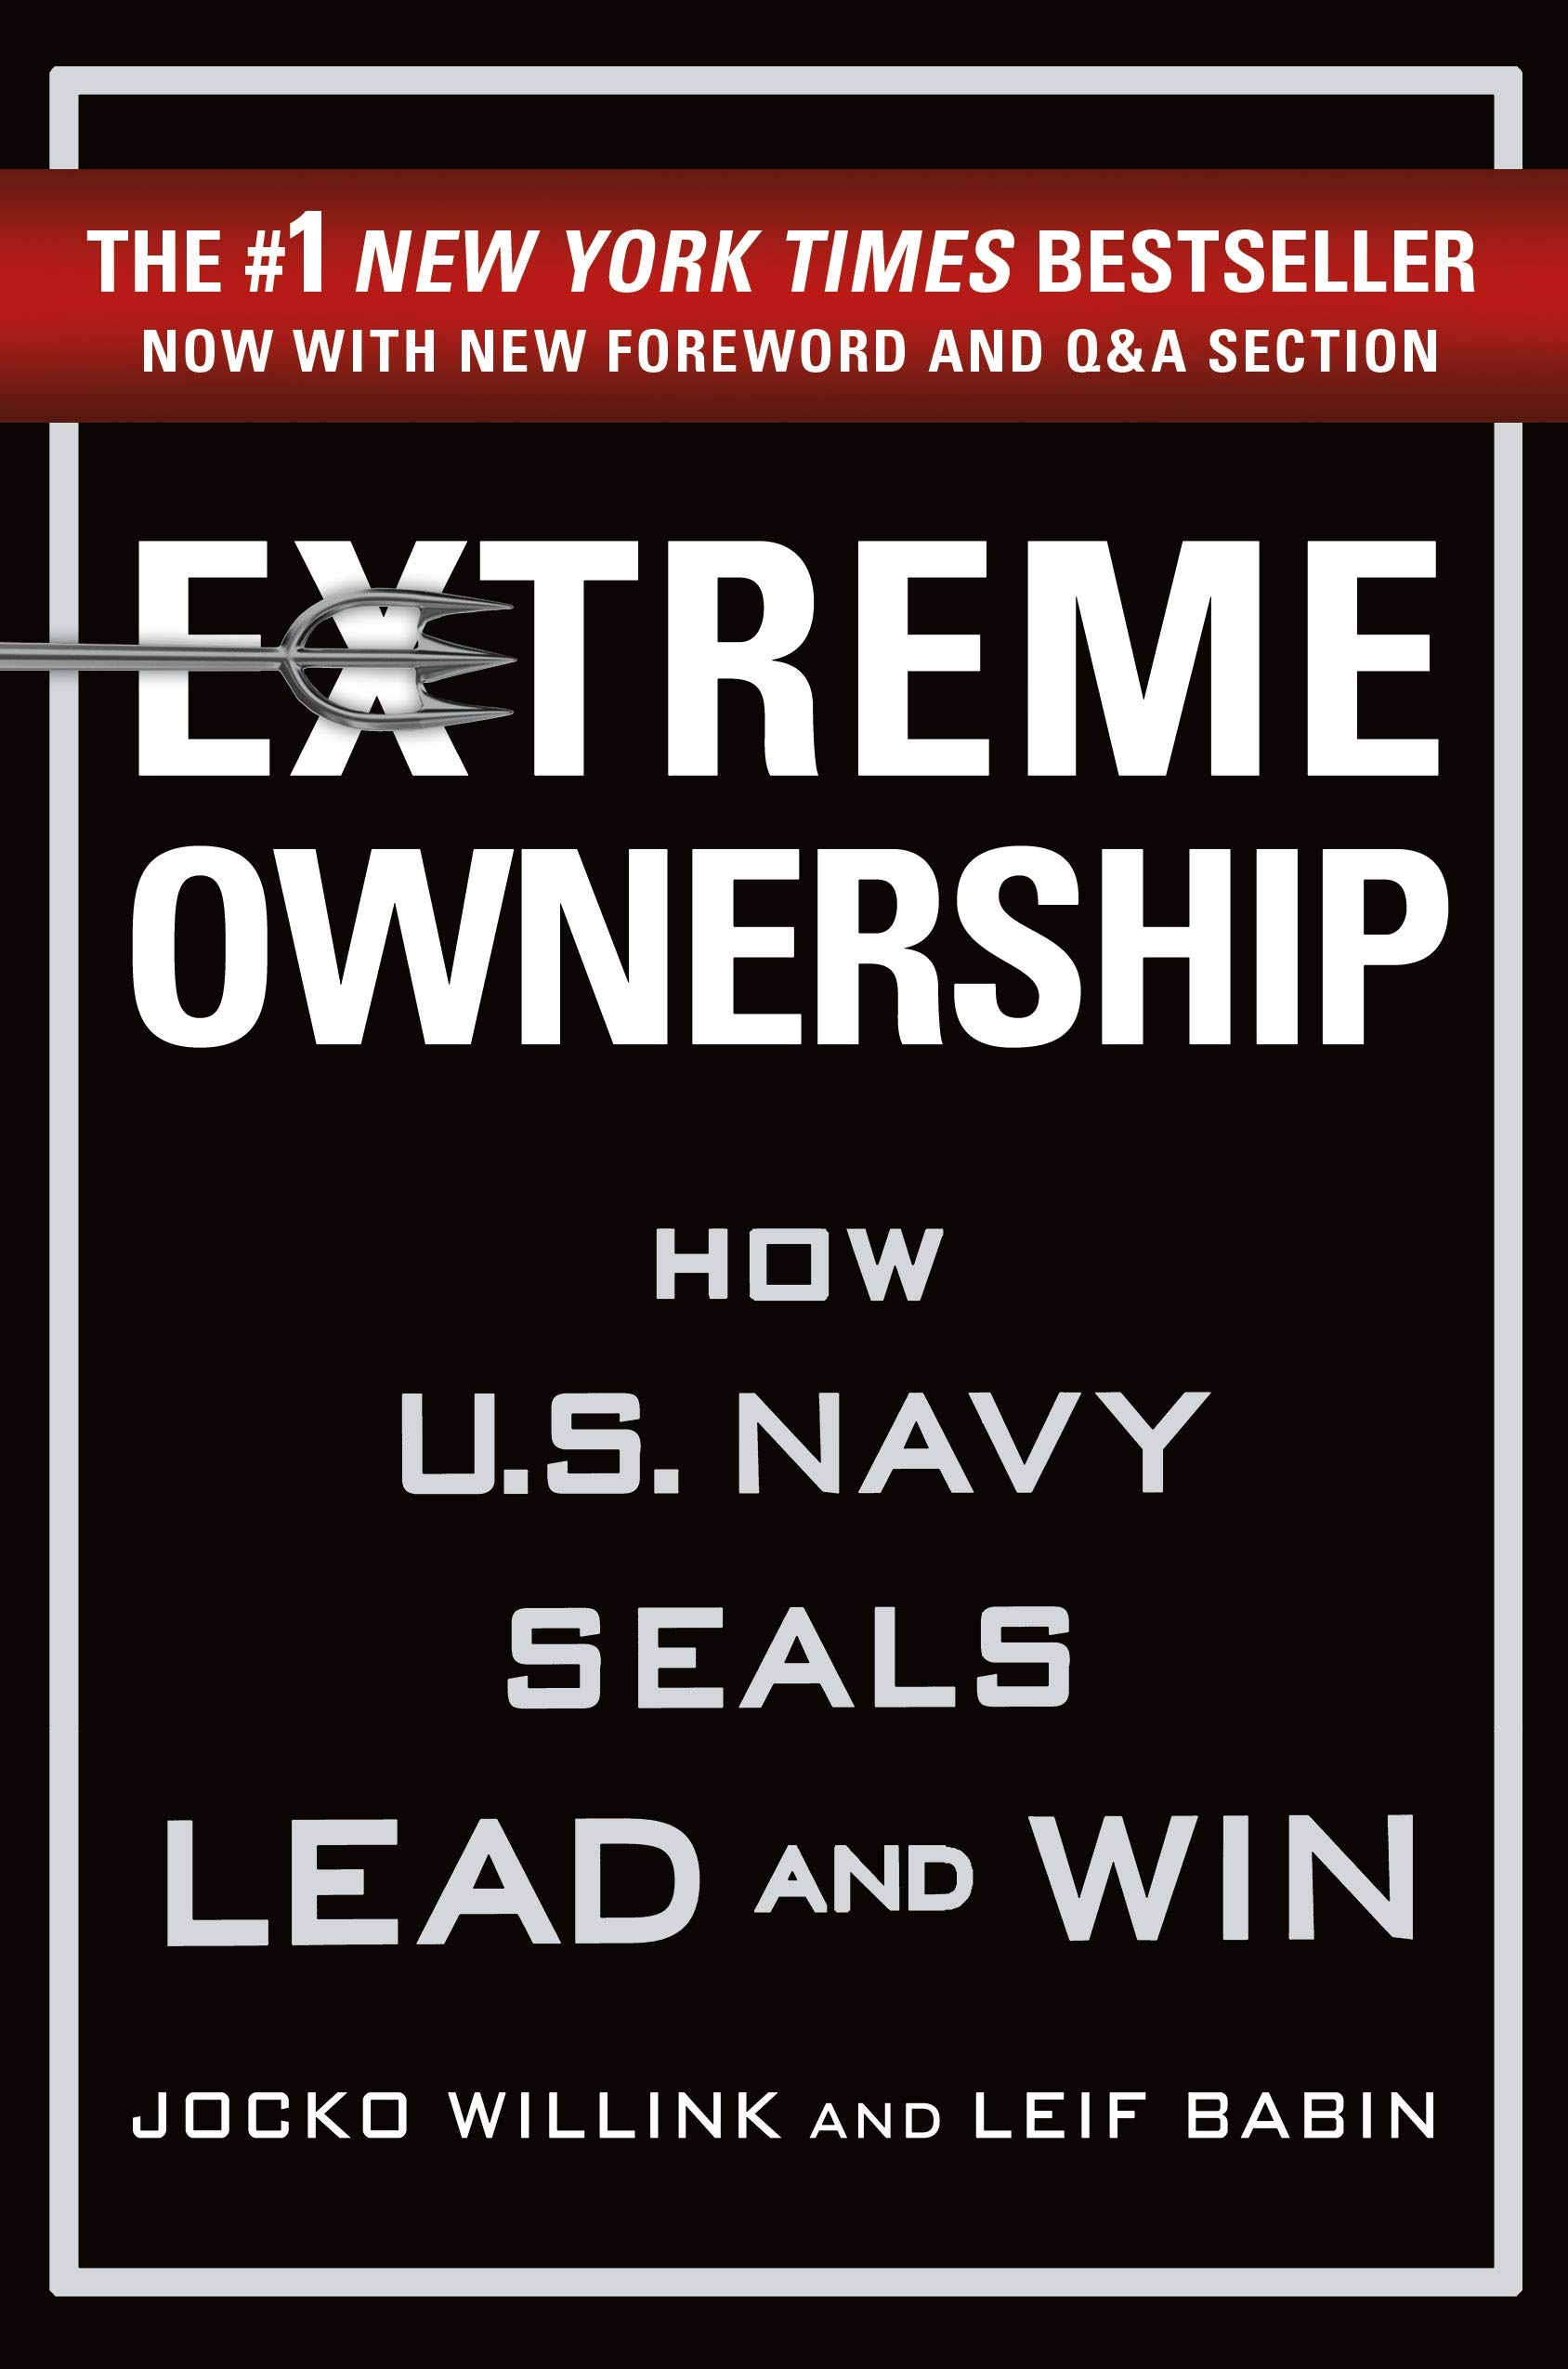 EXTREME OWNERSHIP: HOW U.S. NAVY SEALS LEAD AND WIN (INGLÃ‰S) PASTA DURA â€“ 21 NOVIEMBRE 2017